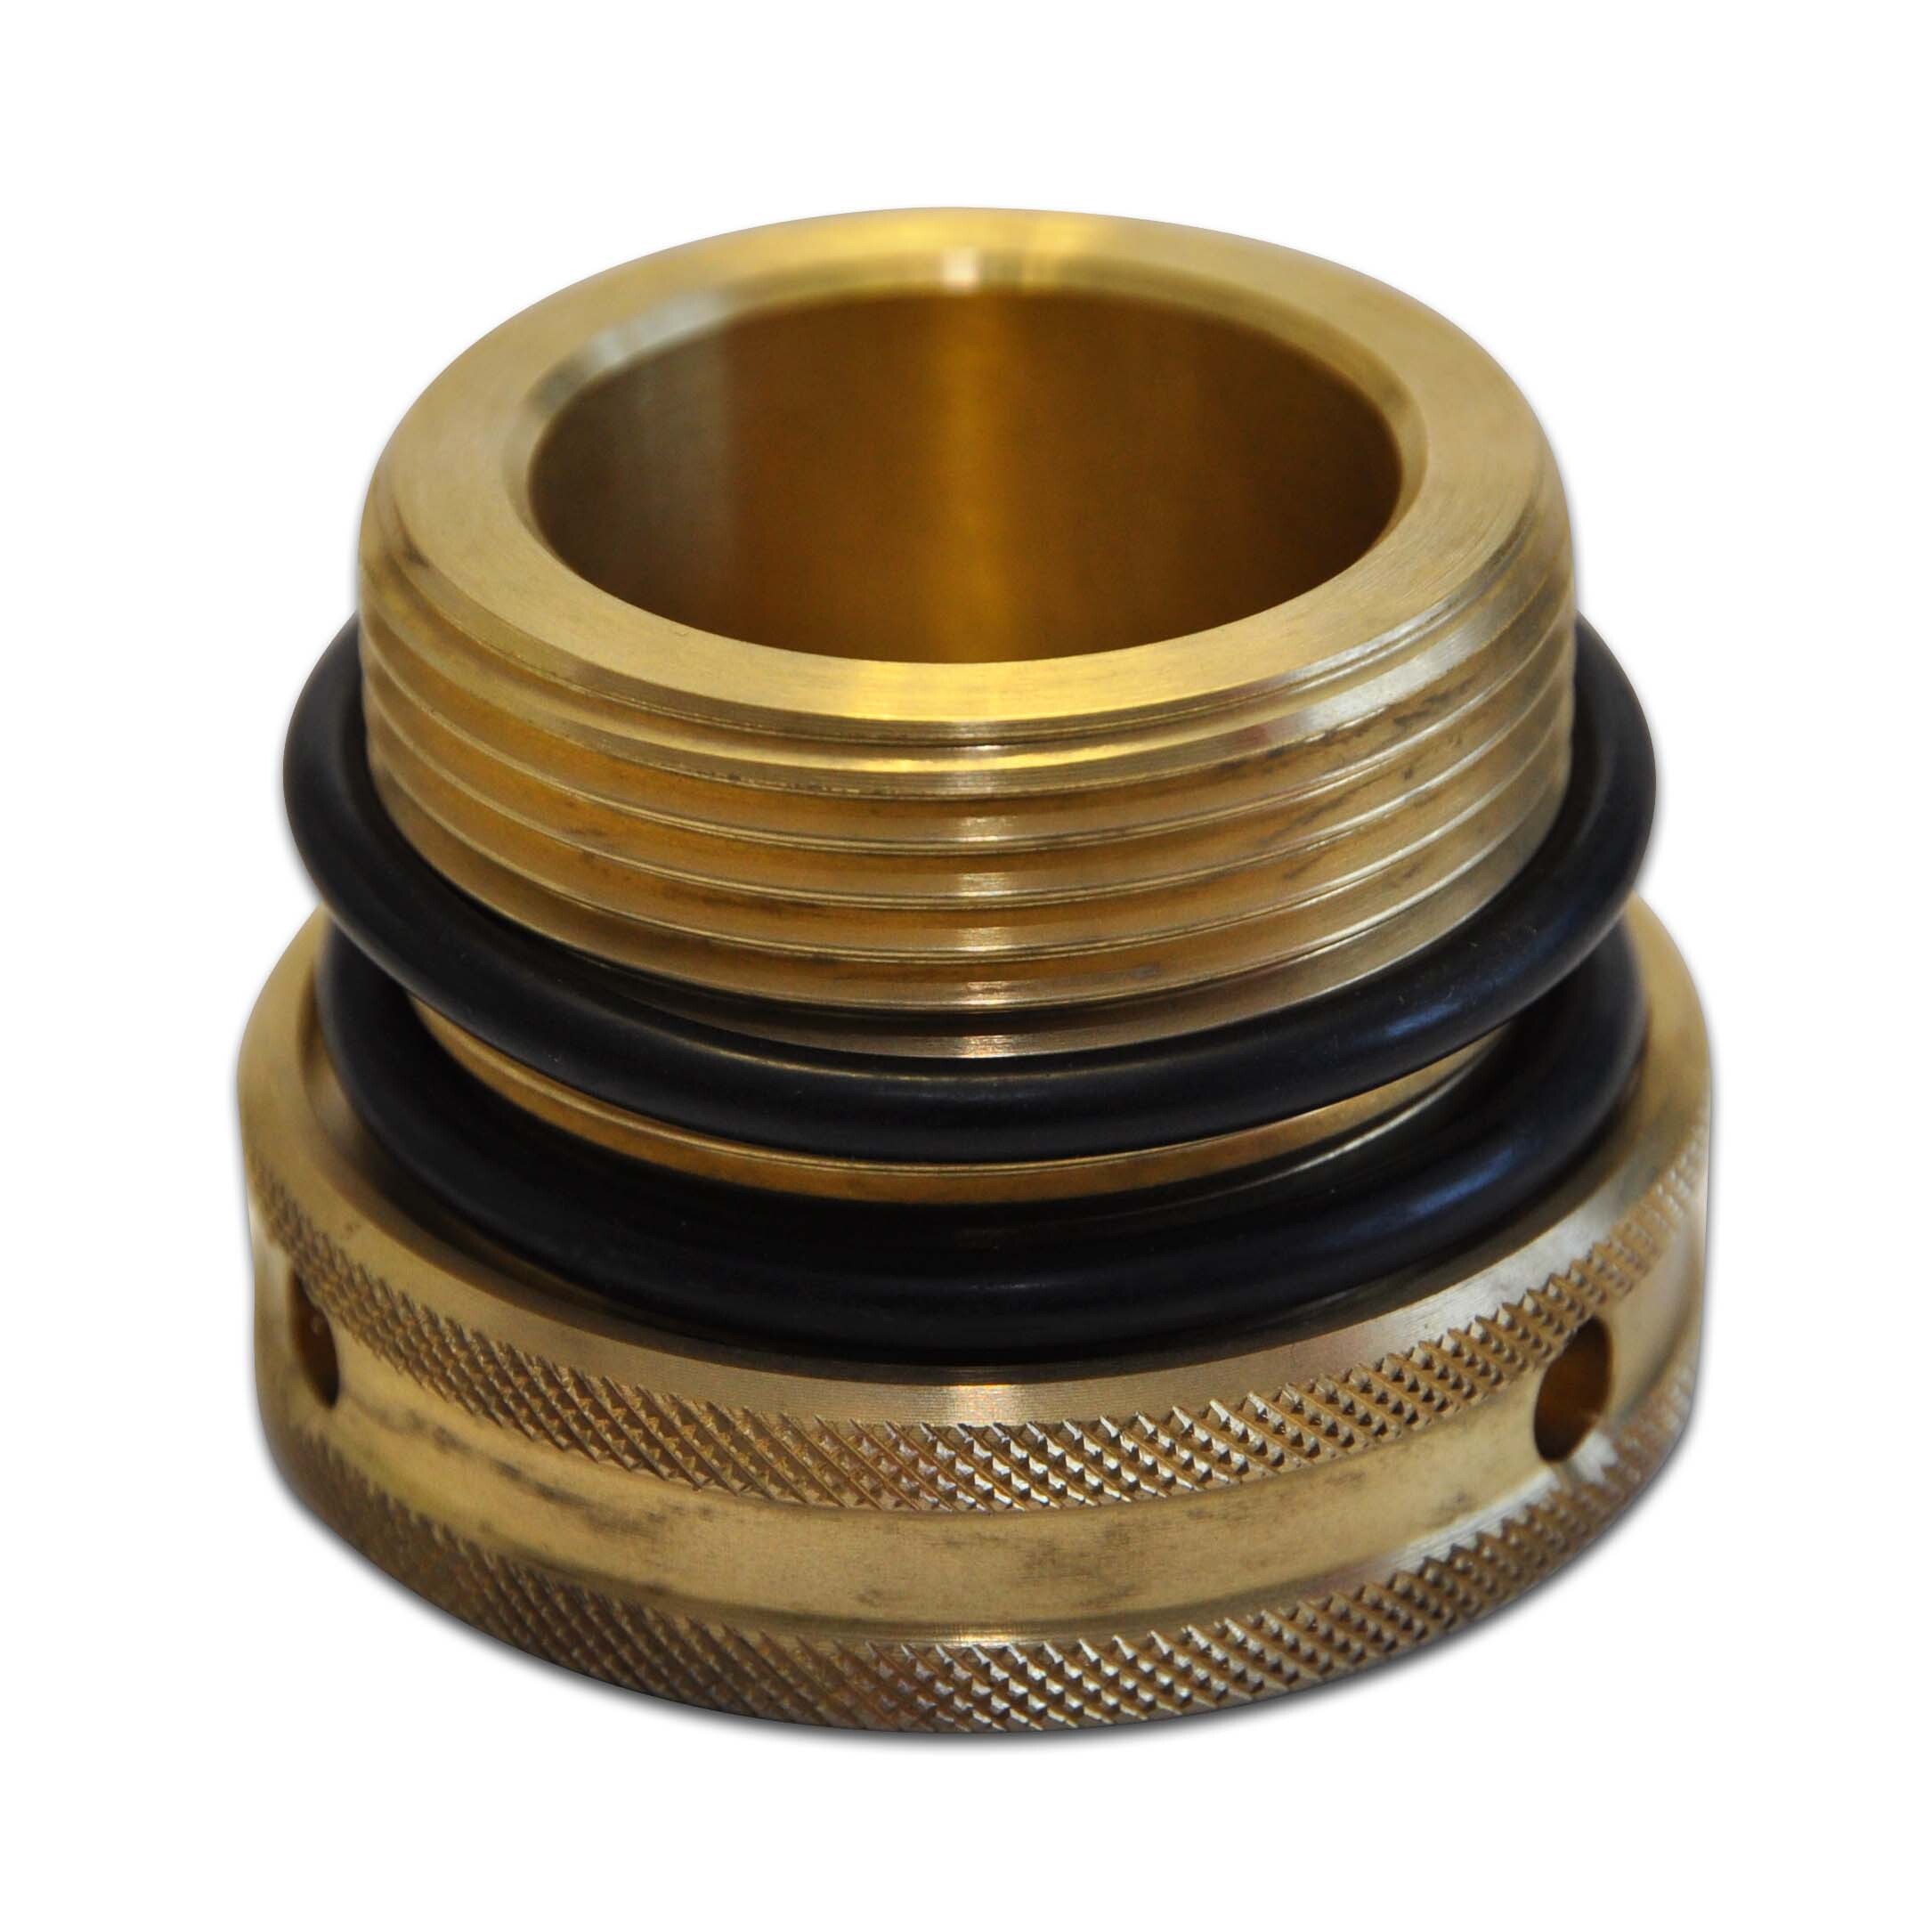 Adapter 1 inch  IT to G 1 1/2 inch ET  brass